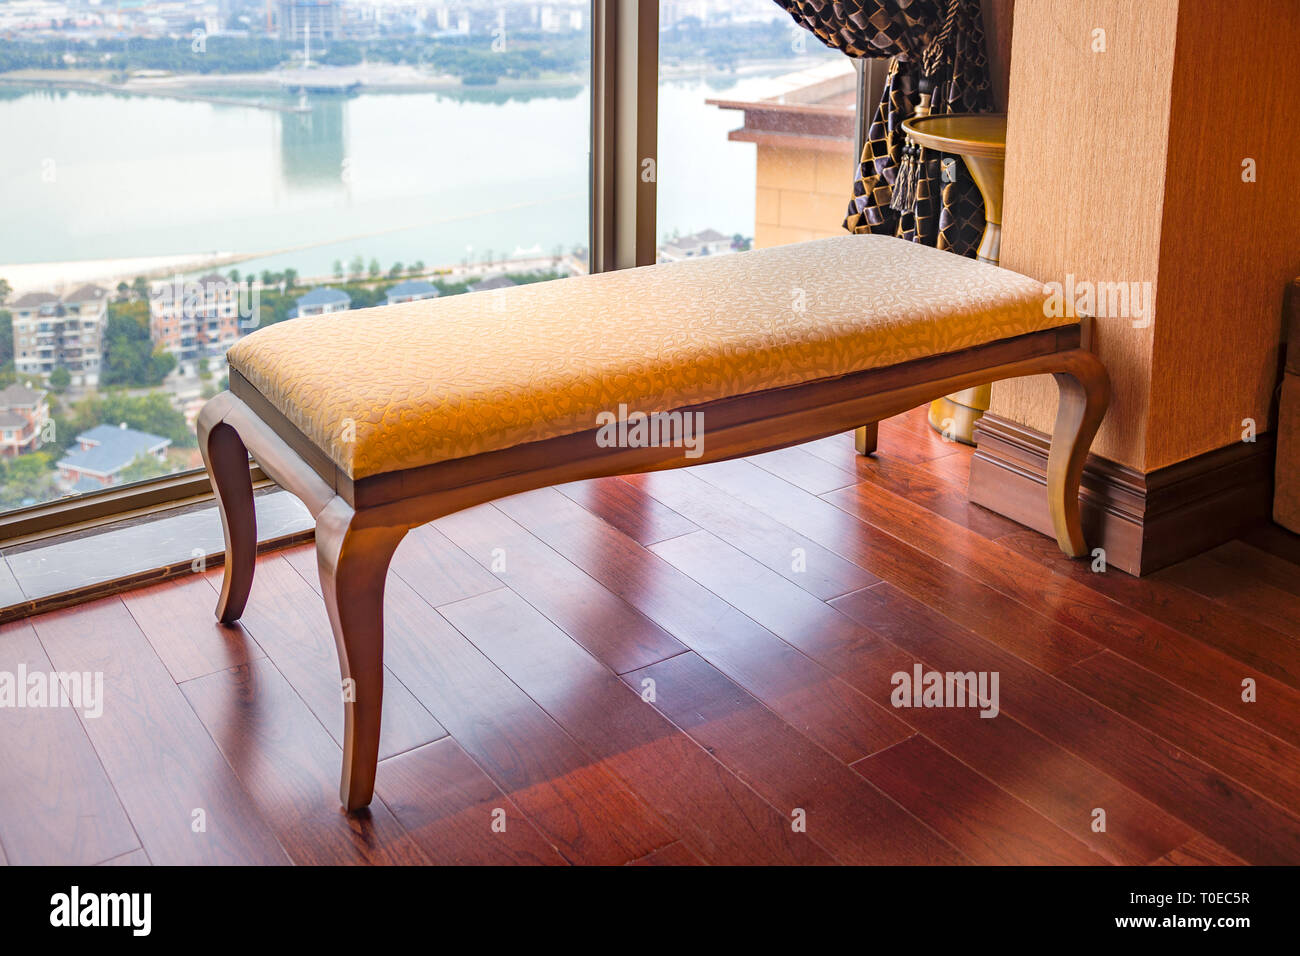 Long lounge chair near the window at a  new interiors, through the window a new Central Villa District by the river can be seen,Fuzhou,China Stock Photo